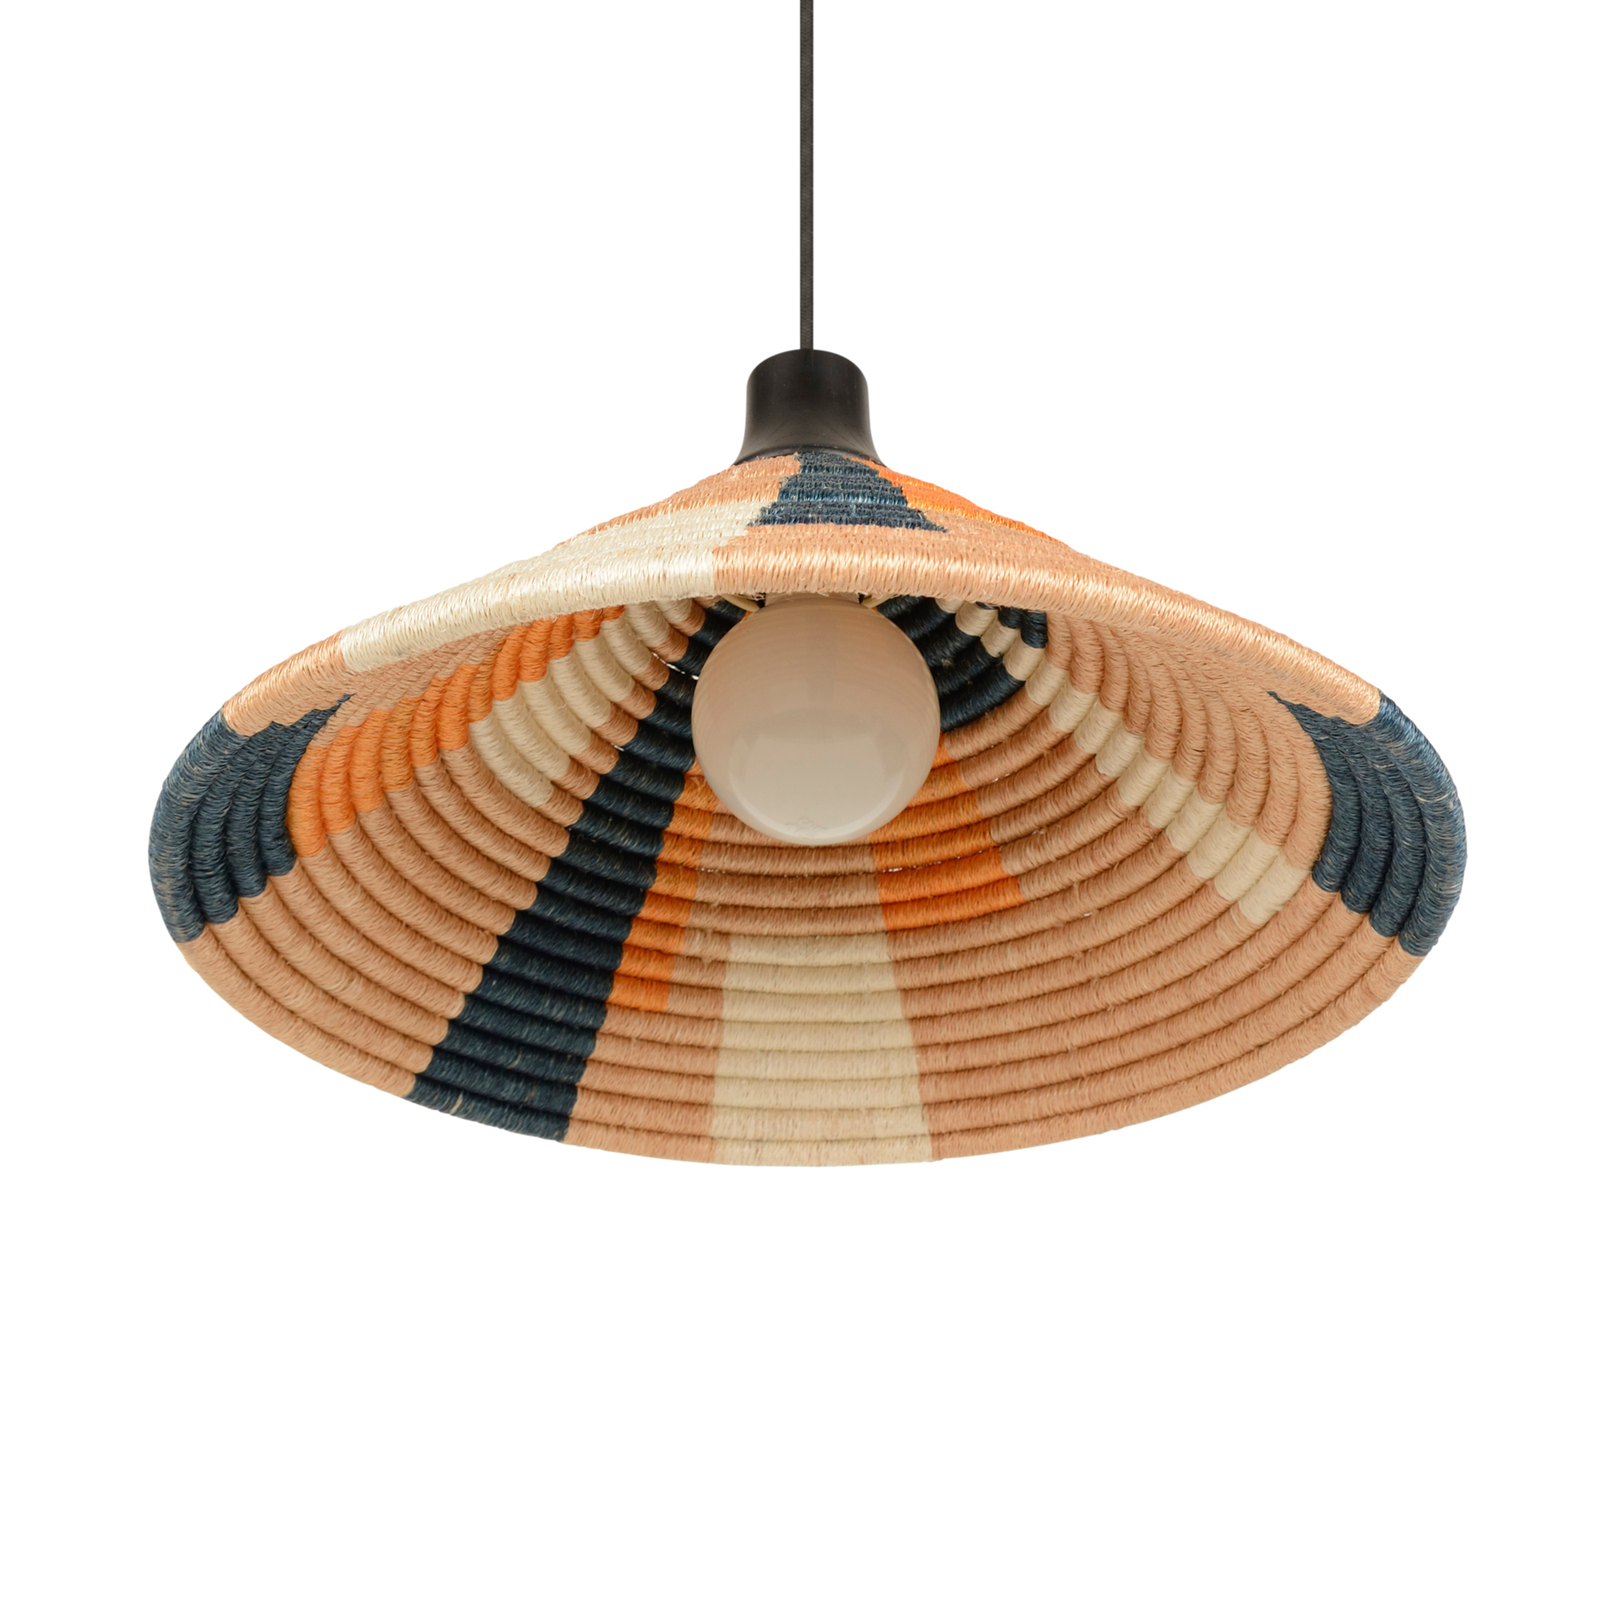 Forestier Parrot hanging light S, sand-coloured